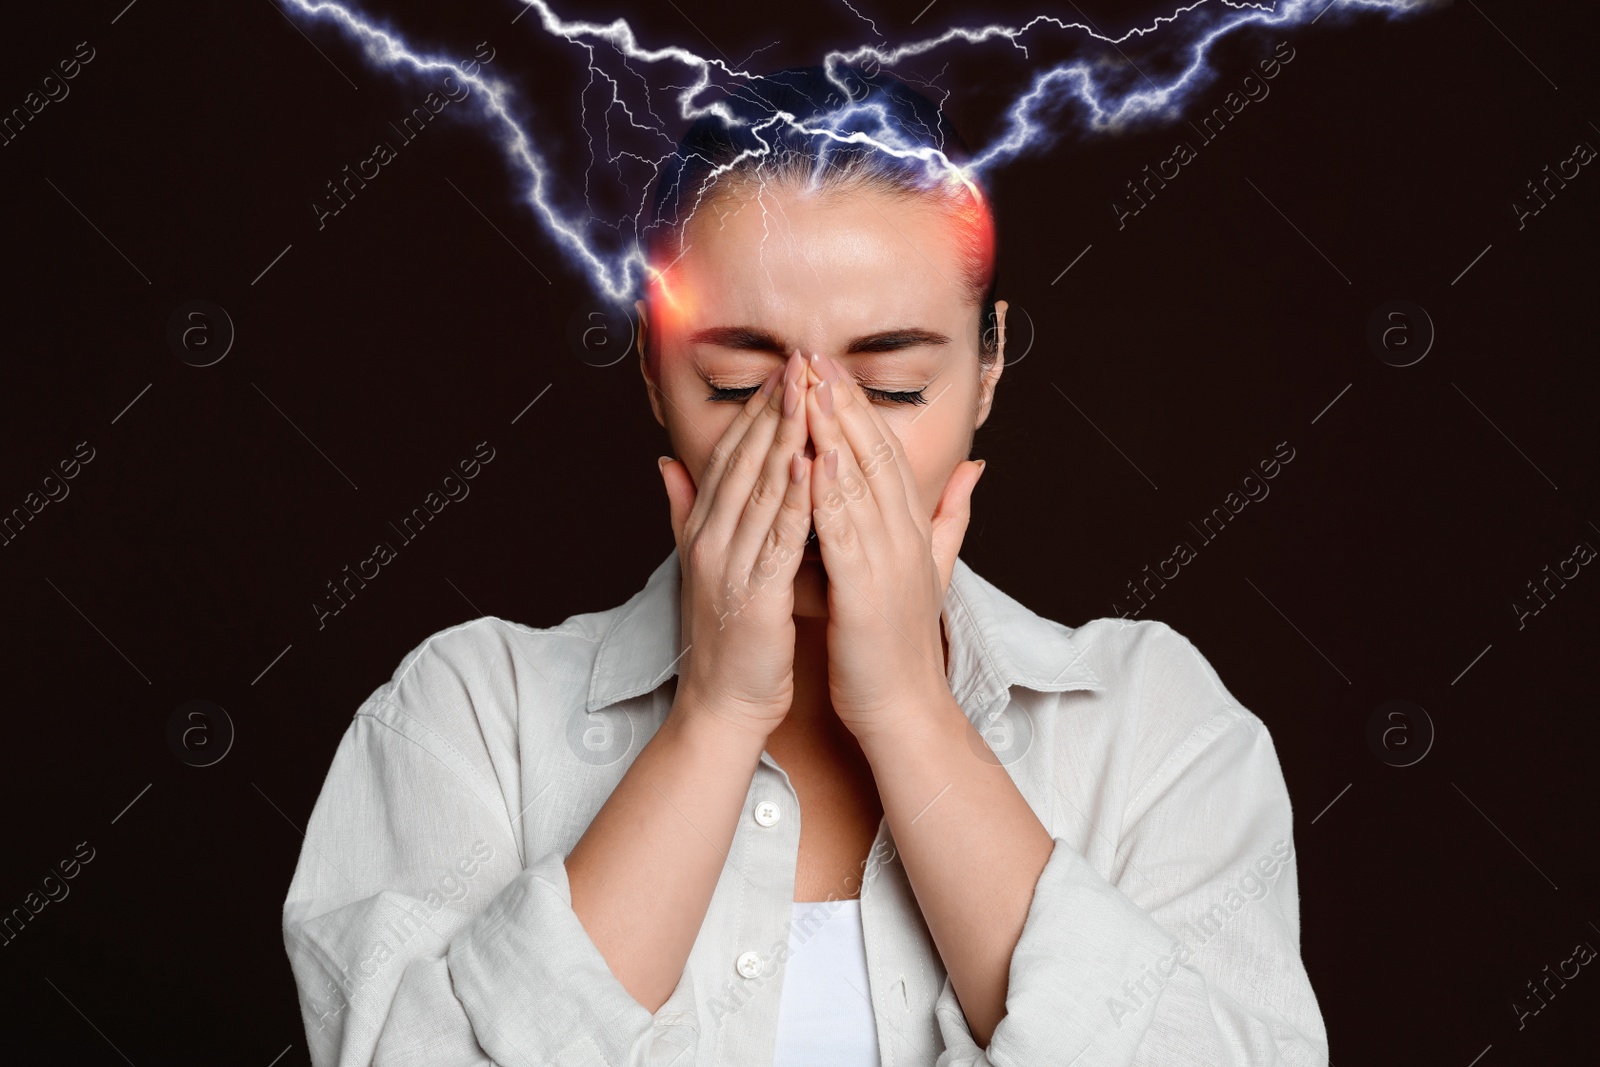 Image of Young woman having headache on brown background. Illustration of lightnings representing severe pain